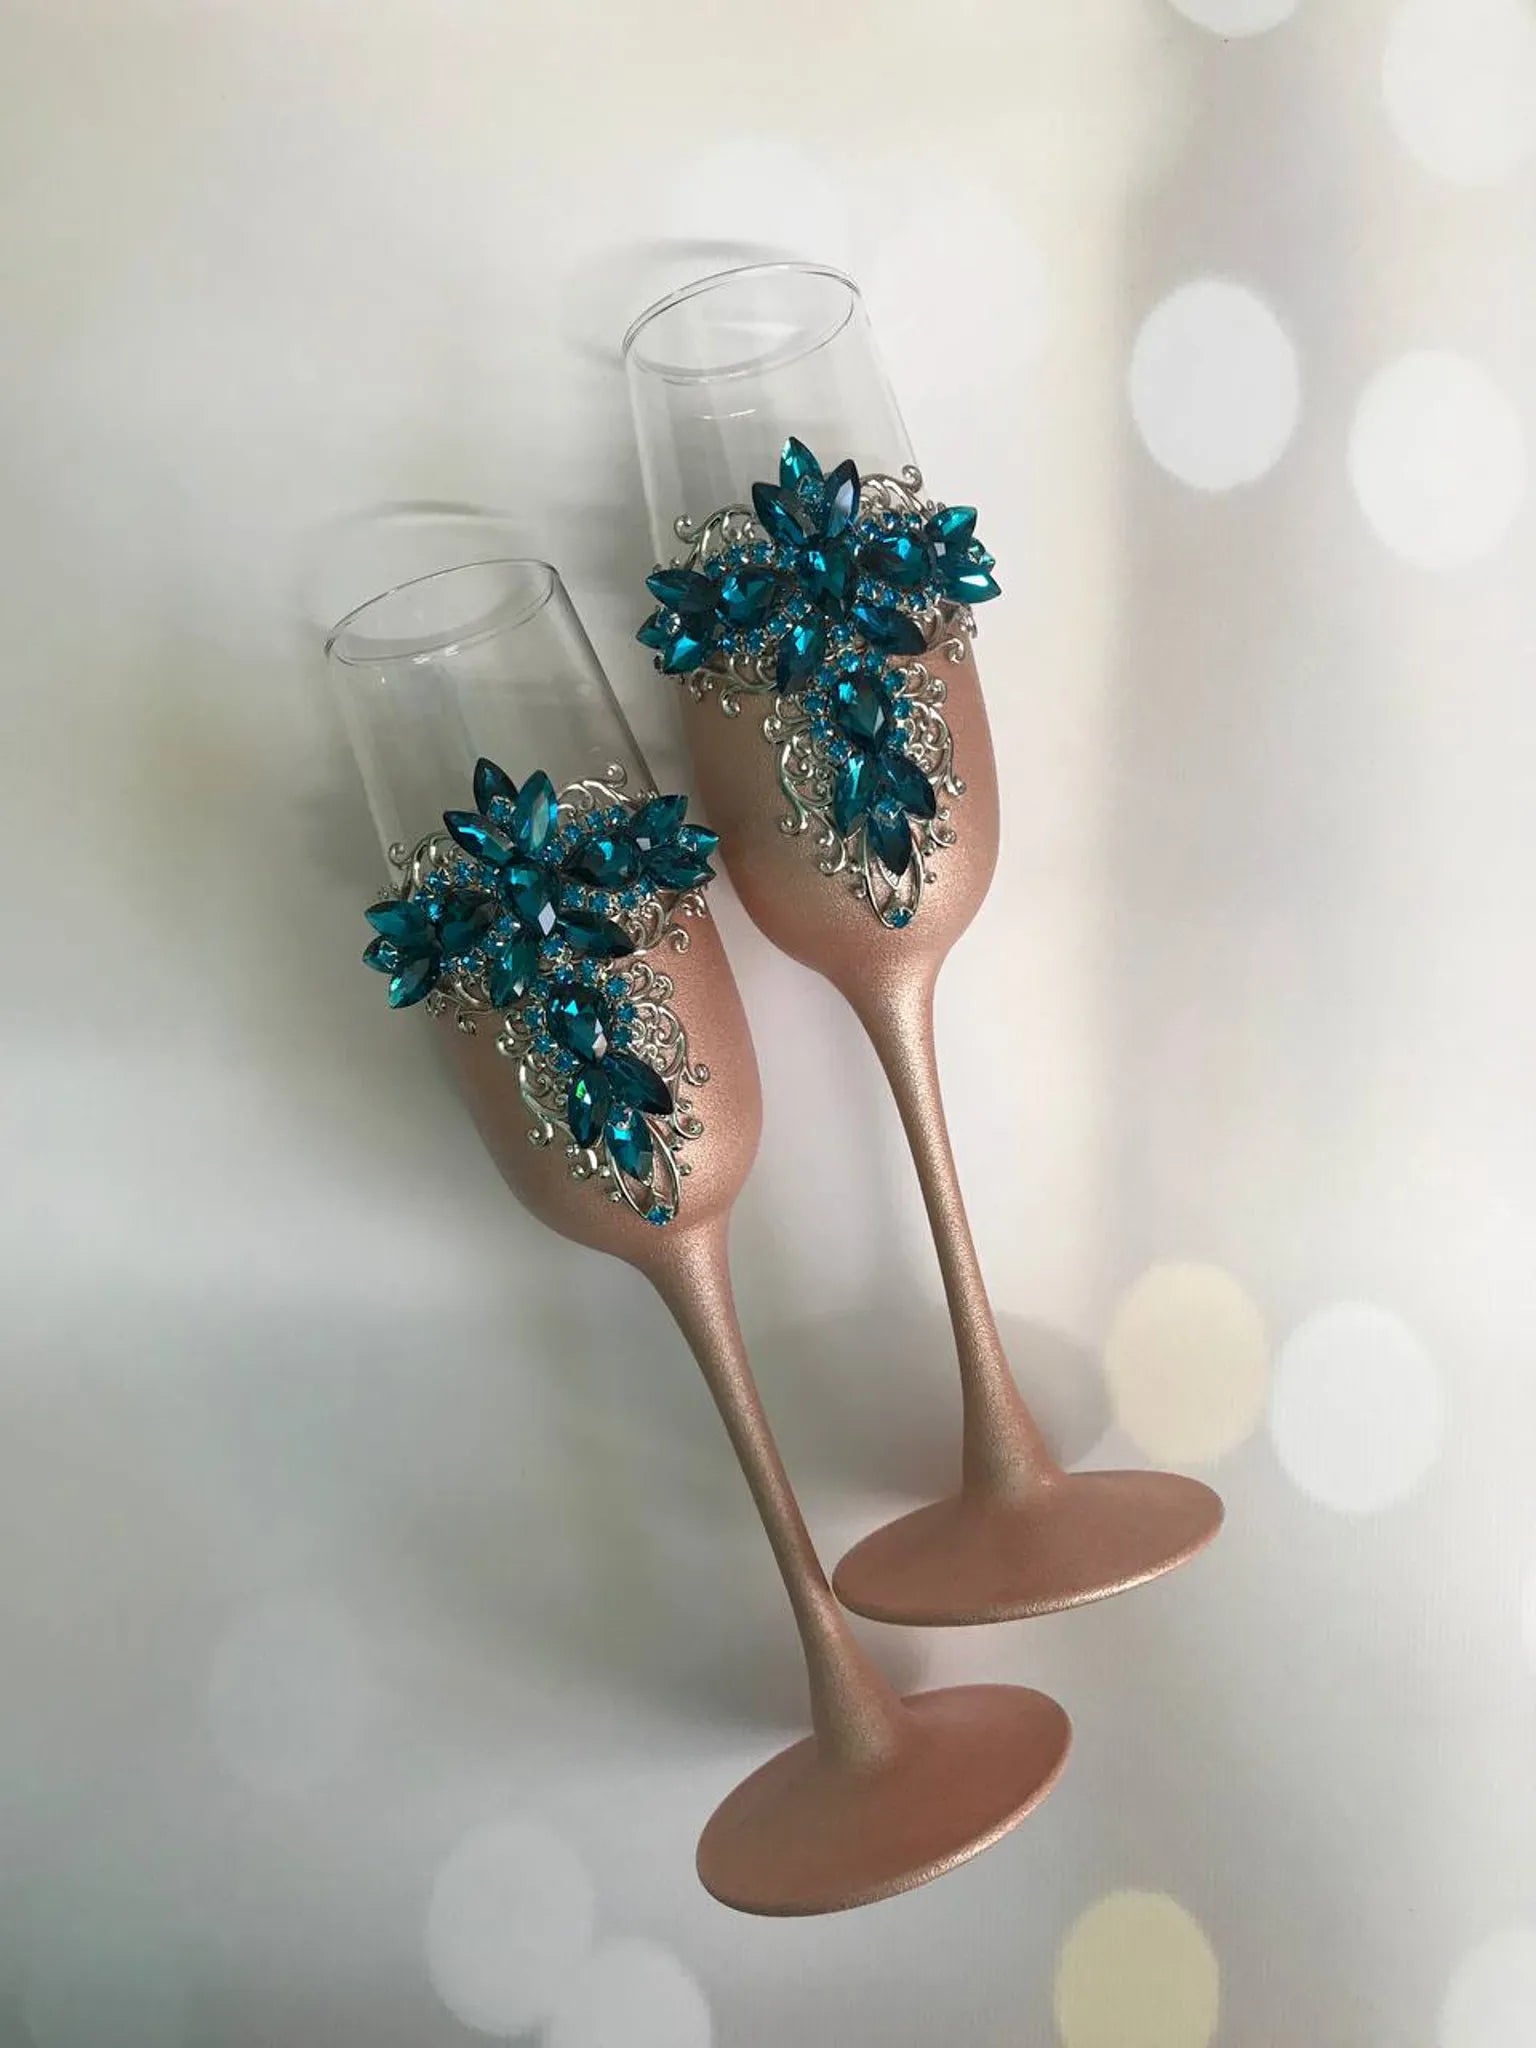 Teal and rose gold wedding toasting flutes